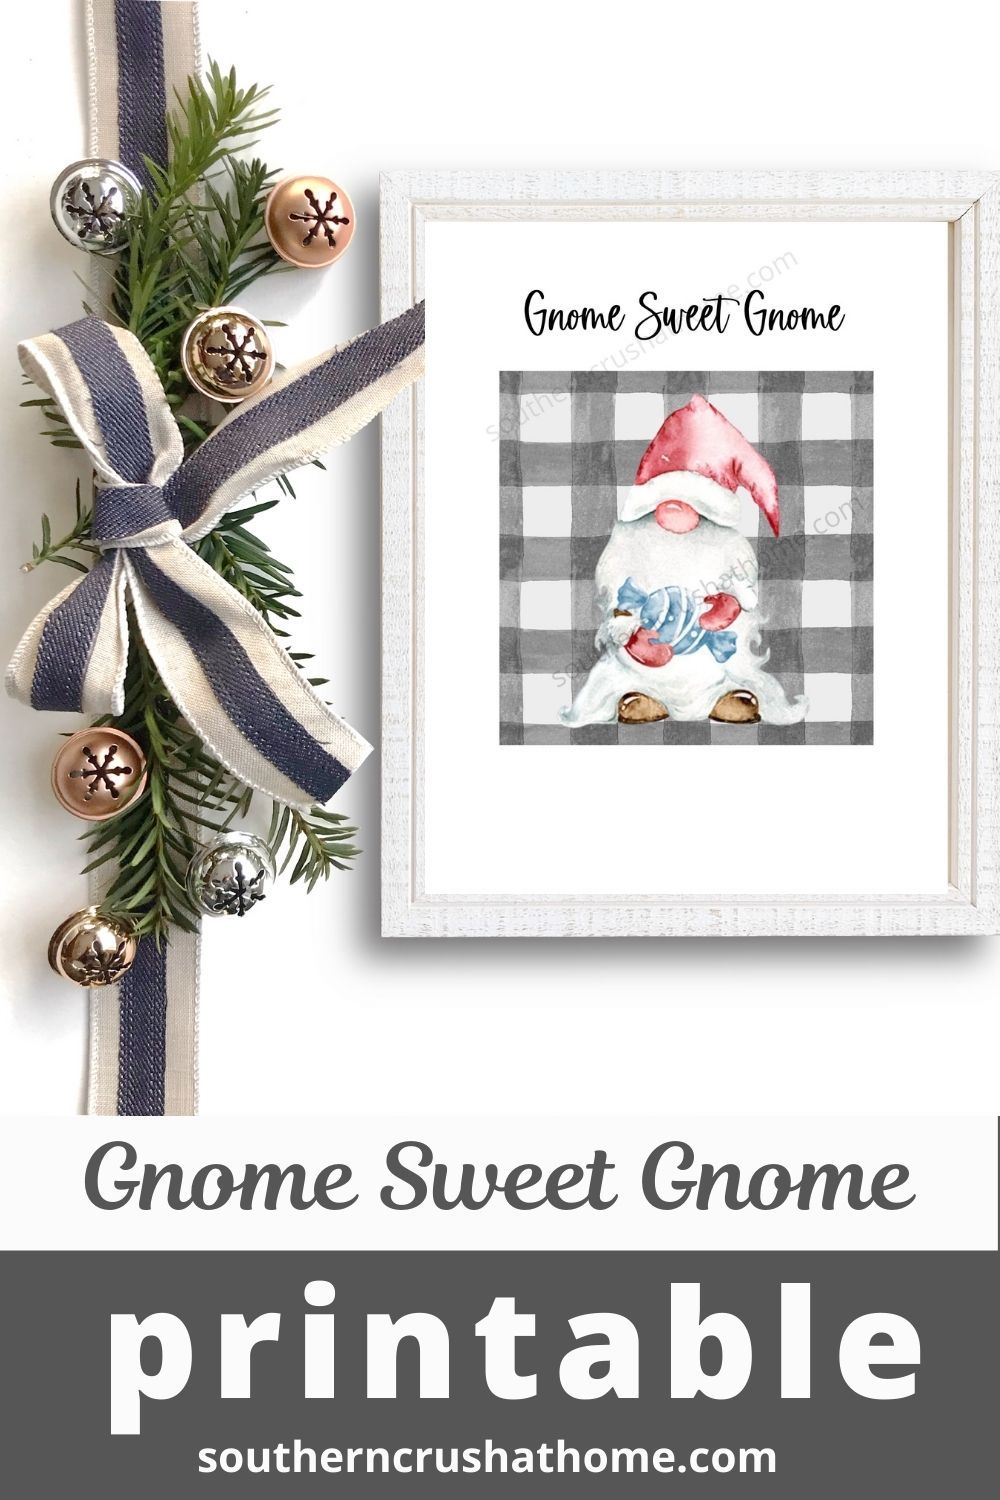 Gnome sweet Gnome - Southern Crush